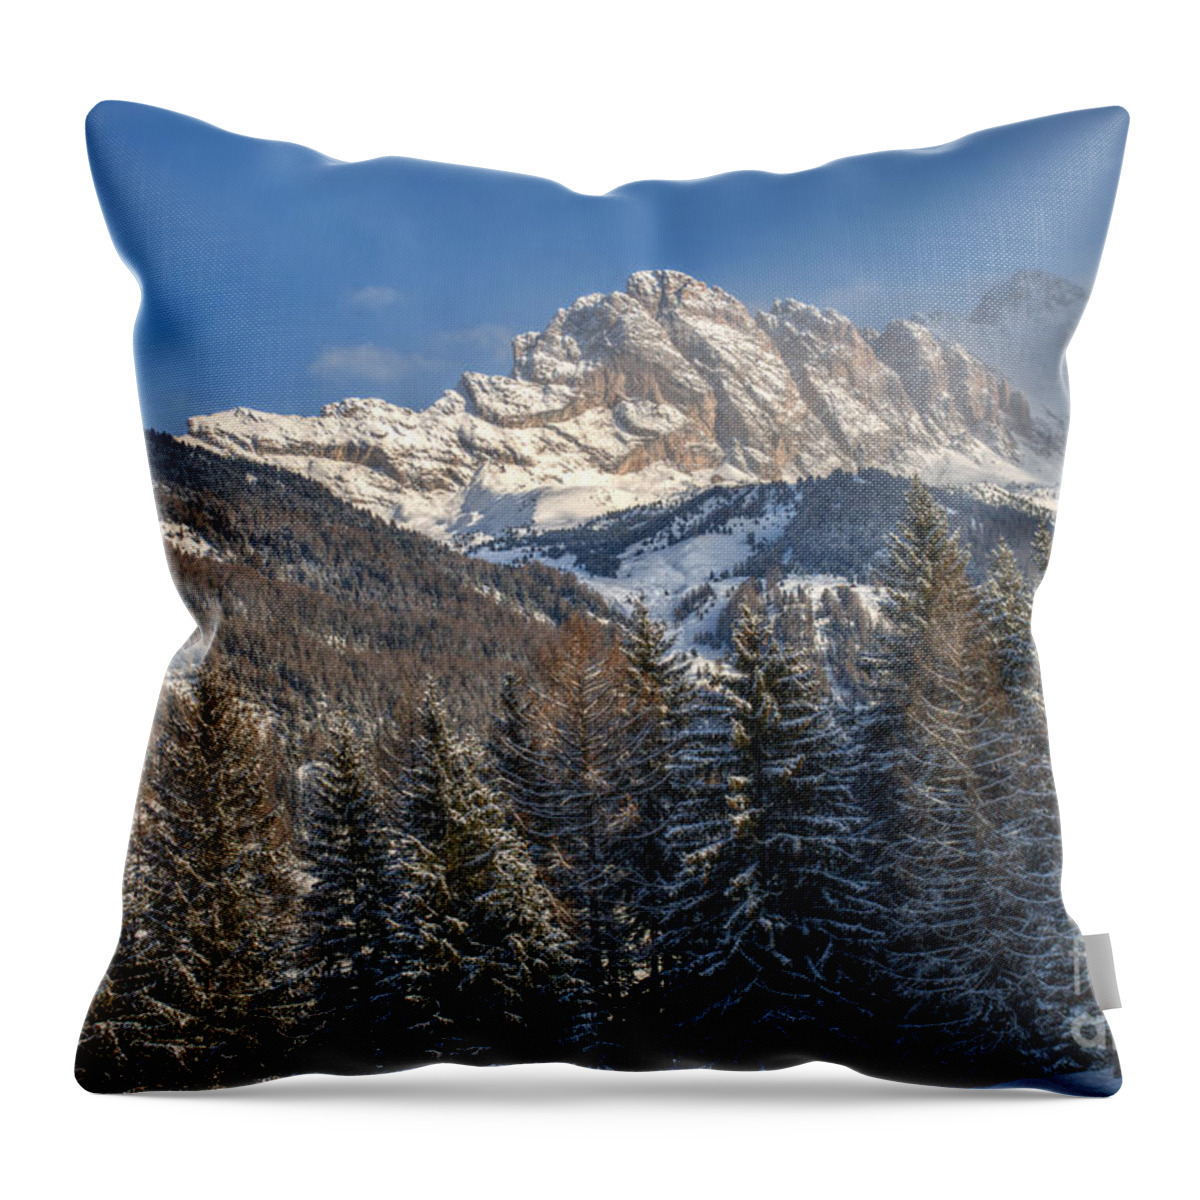 Winter Throw Pillow featuring the photograph Winter Dolomites by Martin Capek